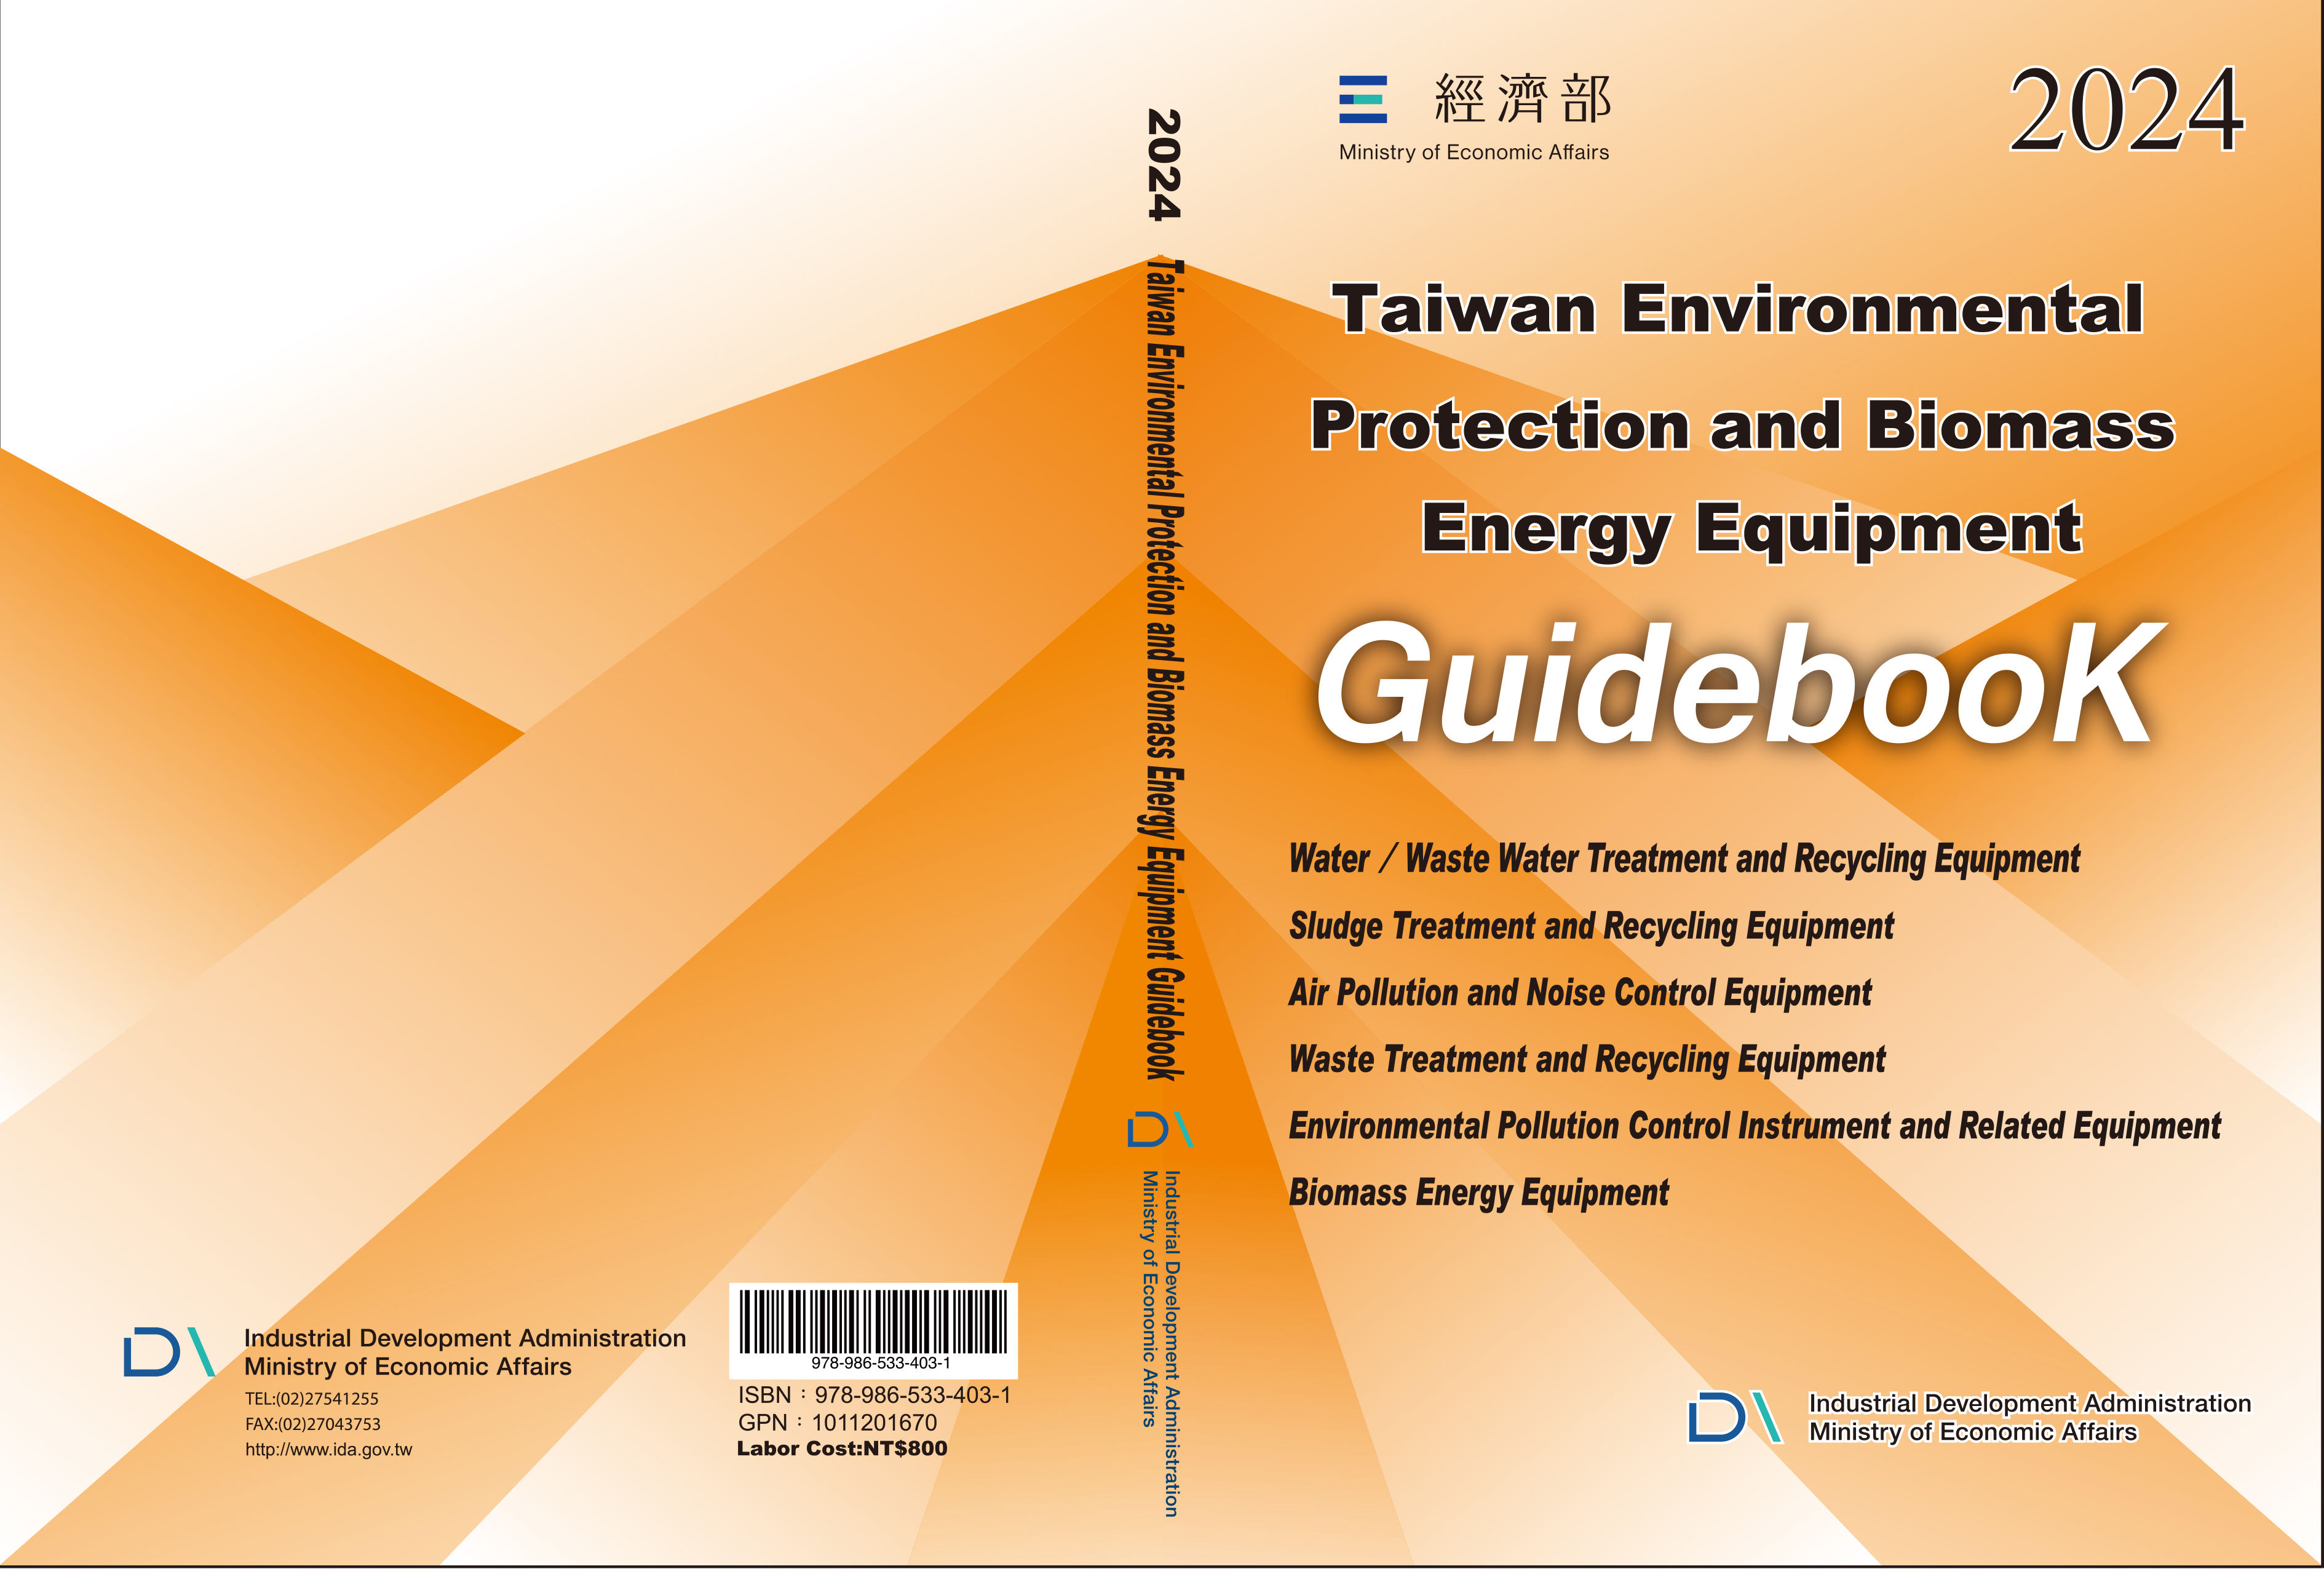 Taiwan environmental protection and biomass energy equipment guidebook. 2024 / editor Industrial Dev